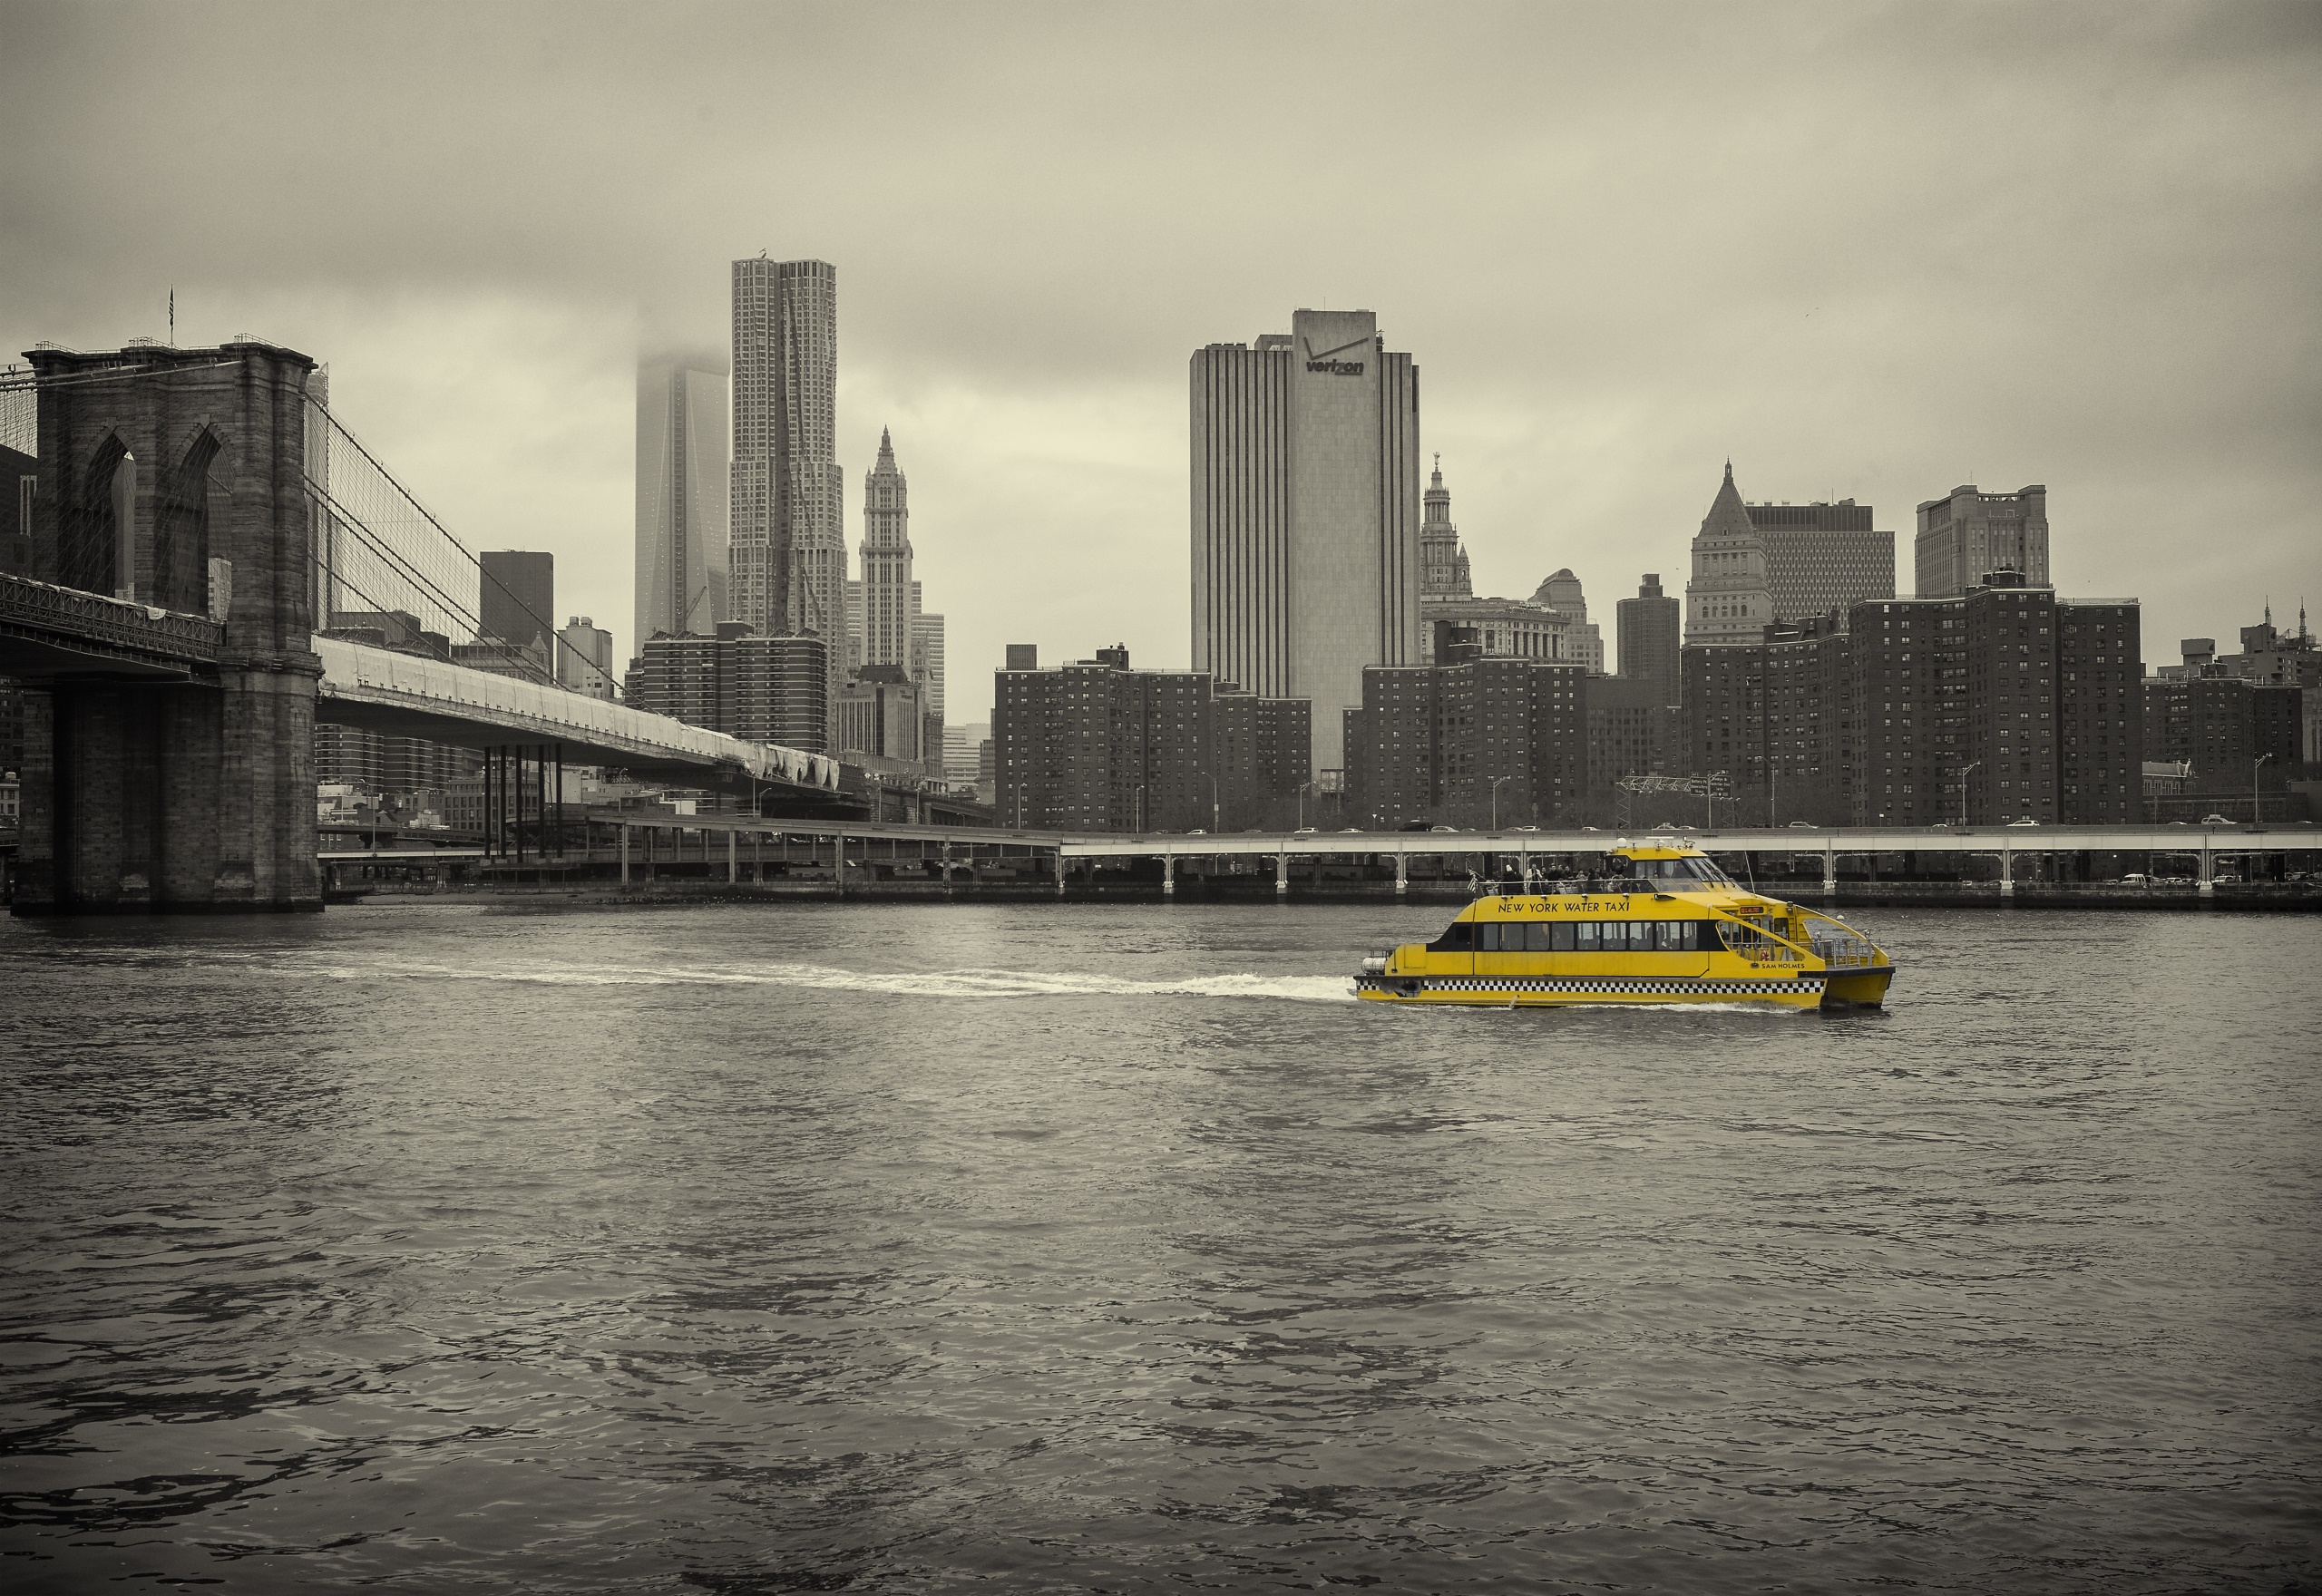 General 2560x1760 boat yellow New York City USA taxi river cityscape Brooklyn Bridge selective coloring